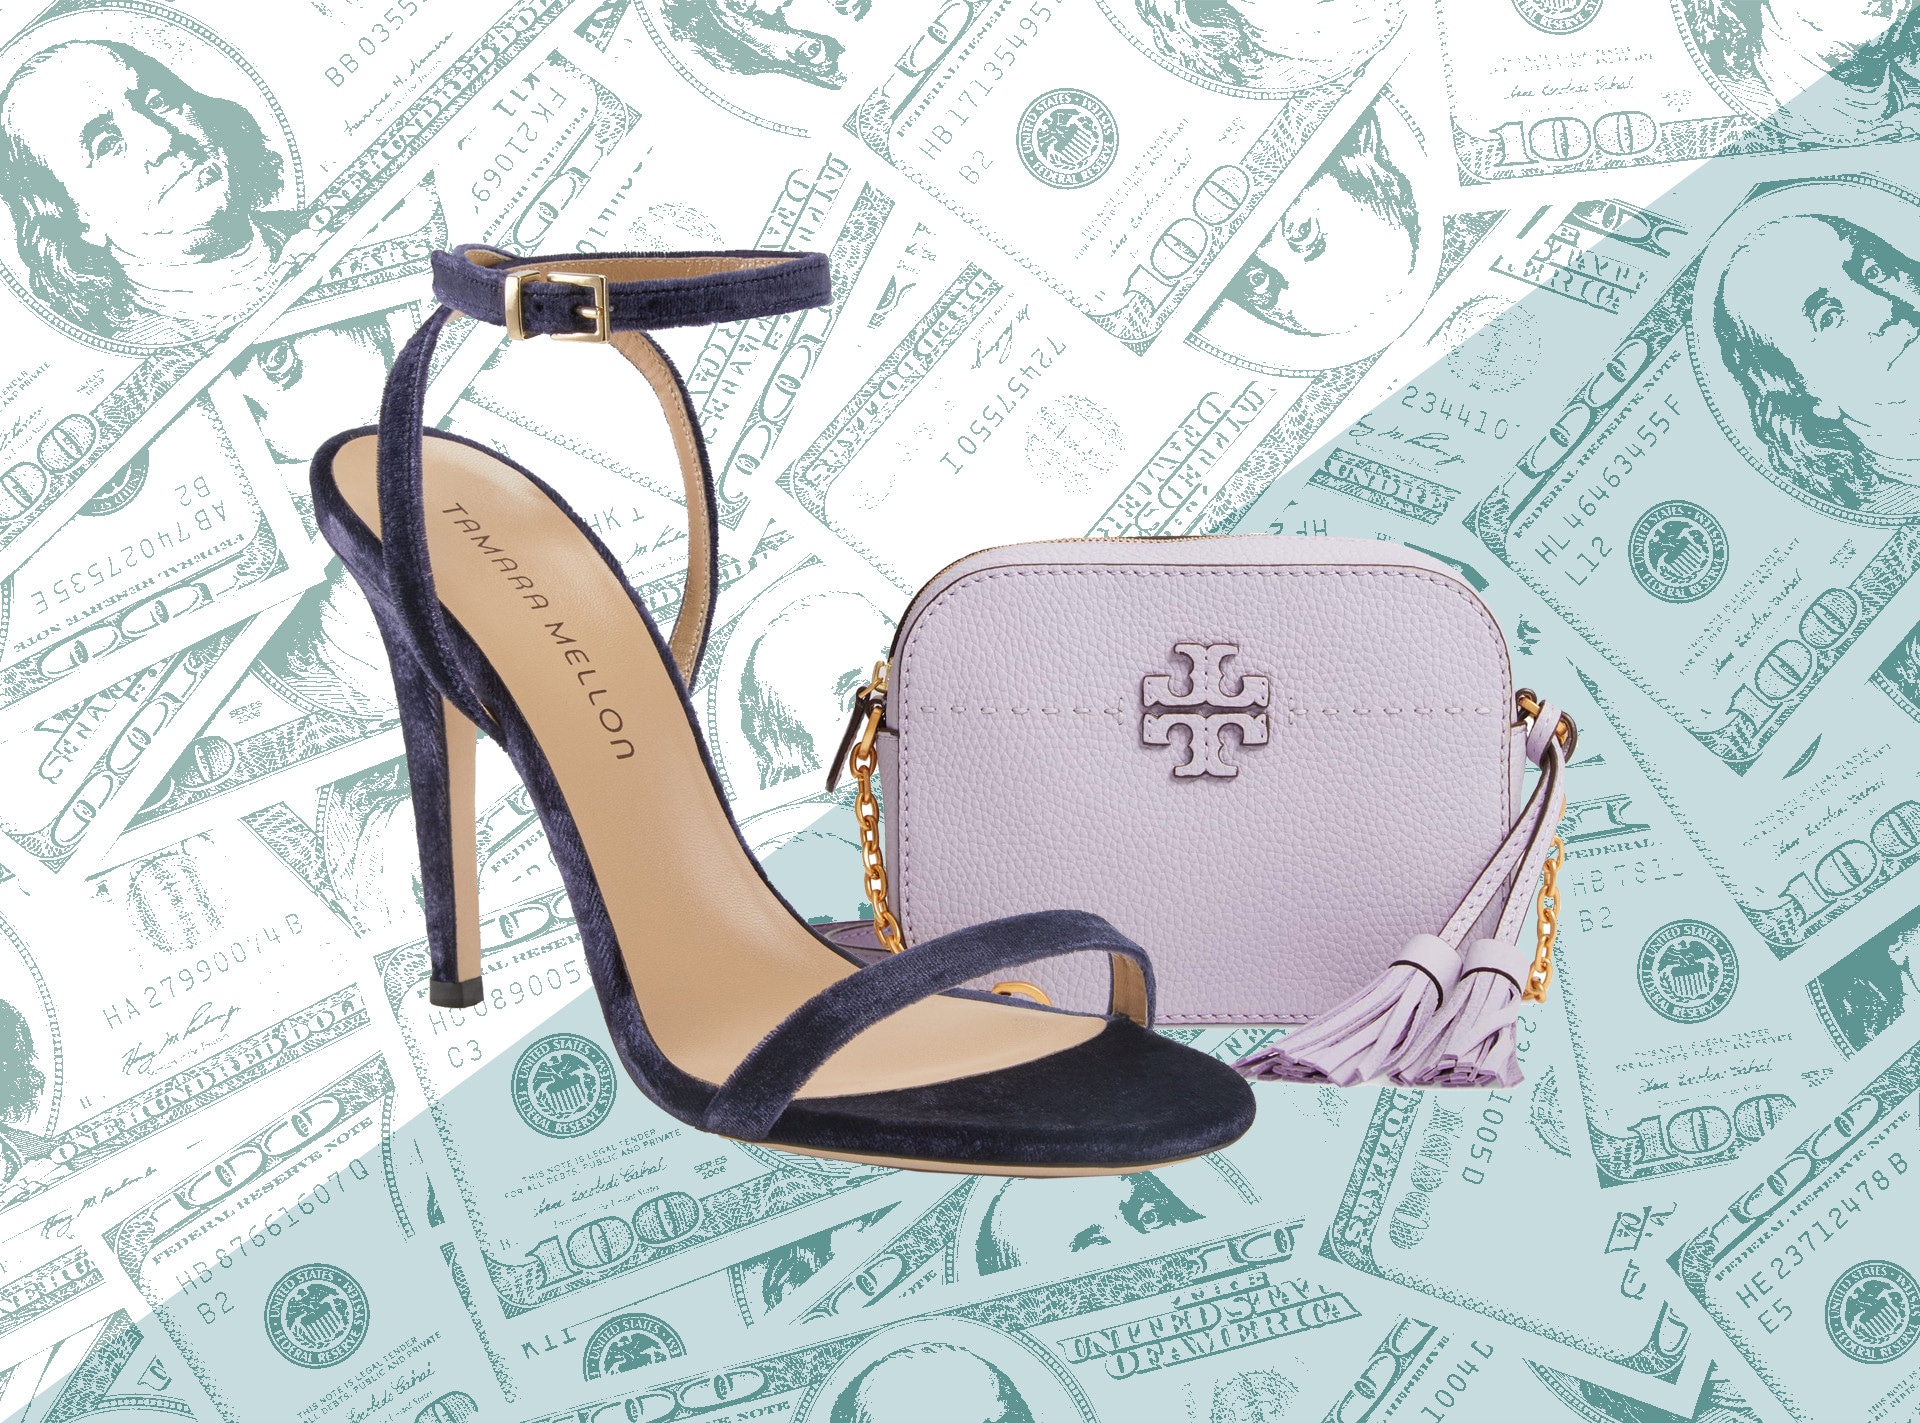 E-Comm: Splurge Your Tax Refund on These Designer Bags & Shoes